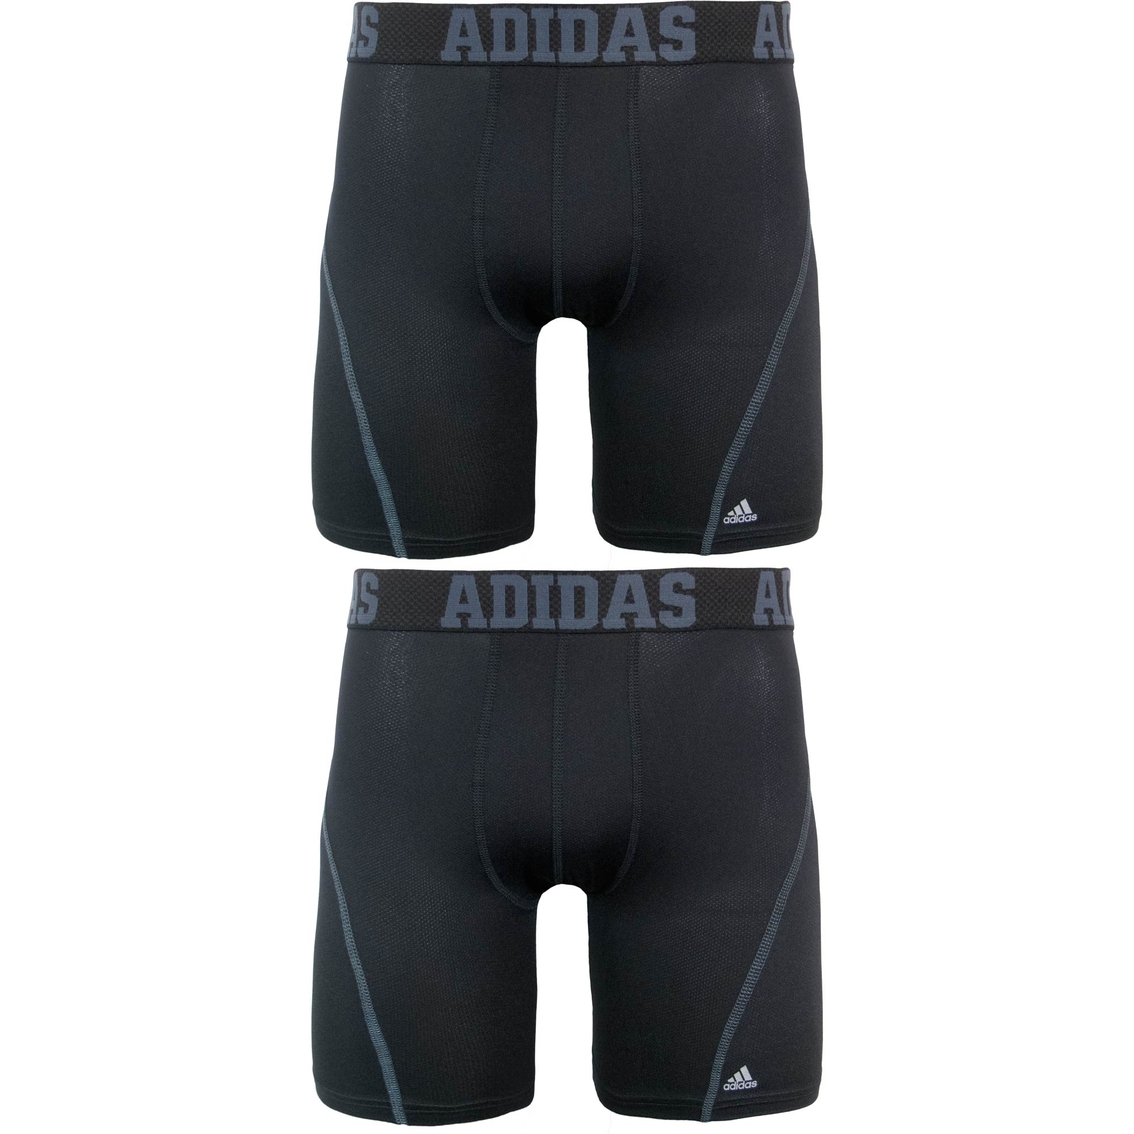 Adidas Climacool Midway Brief 2 Pk., Underwear, Clothing & Accessories